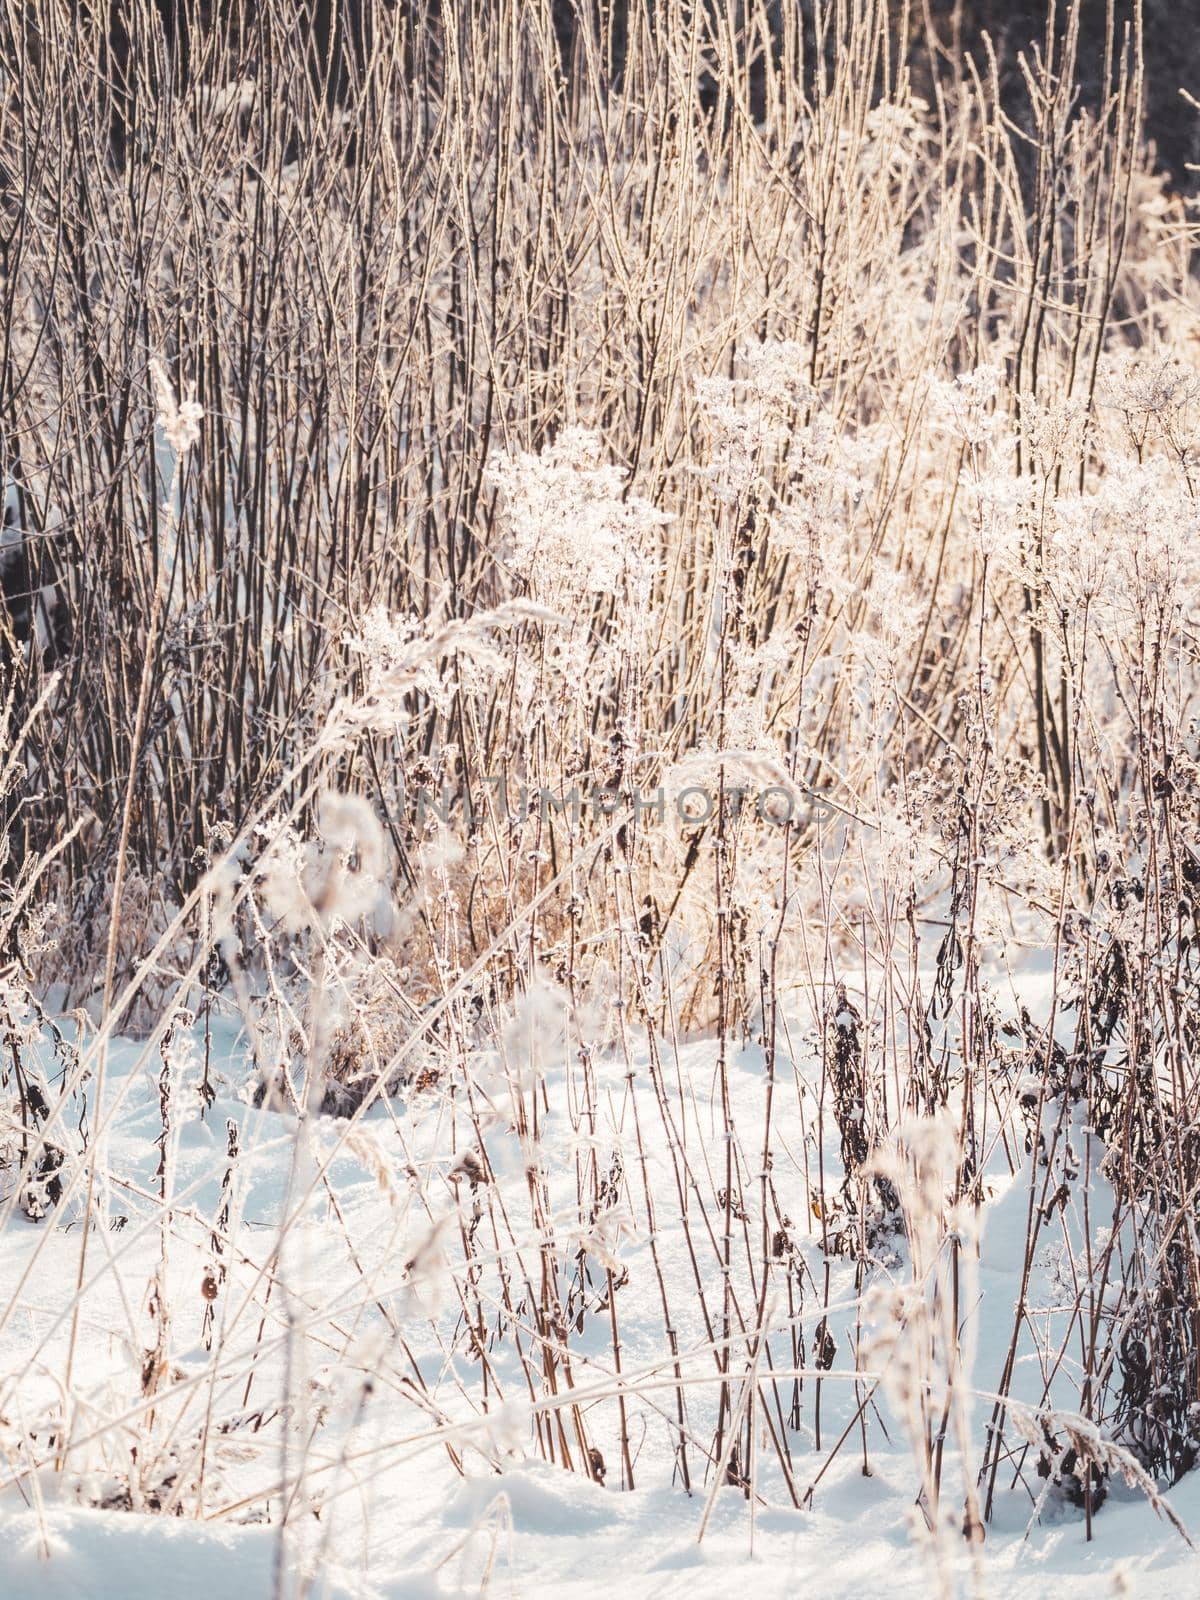 Dried grass under the snow. Snowfall in forest. Winter season. Natural background.